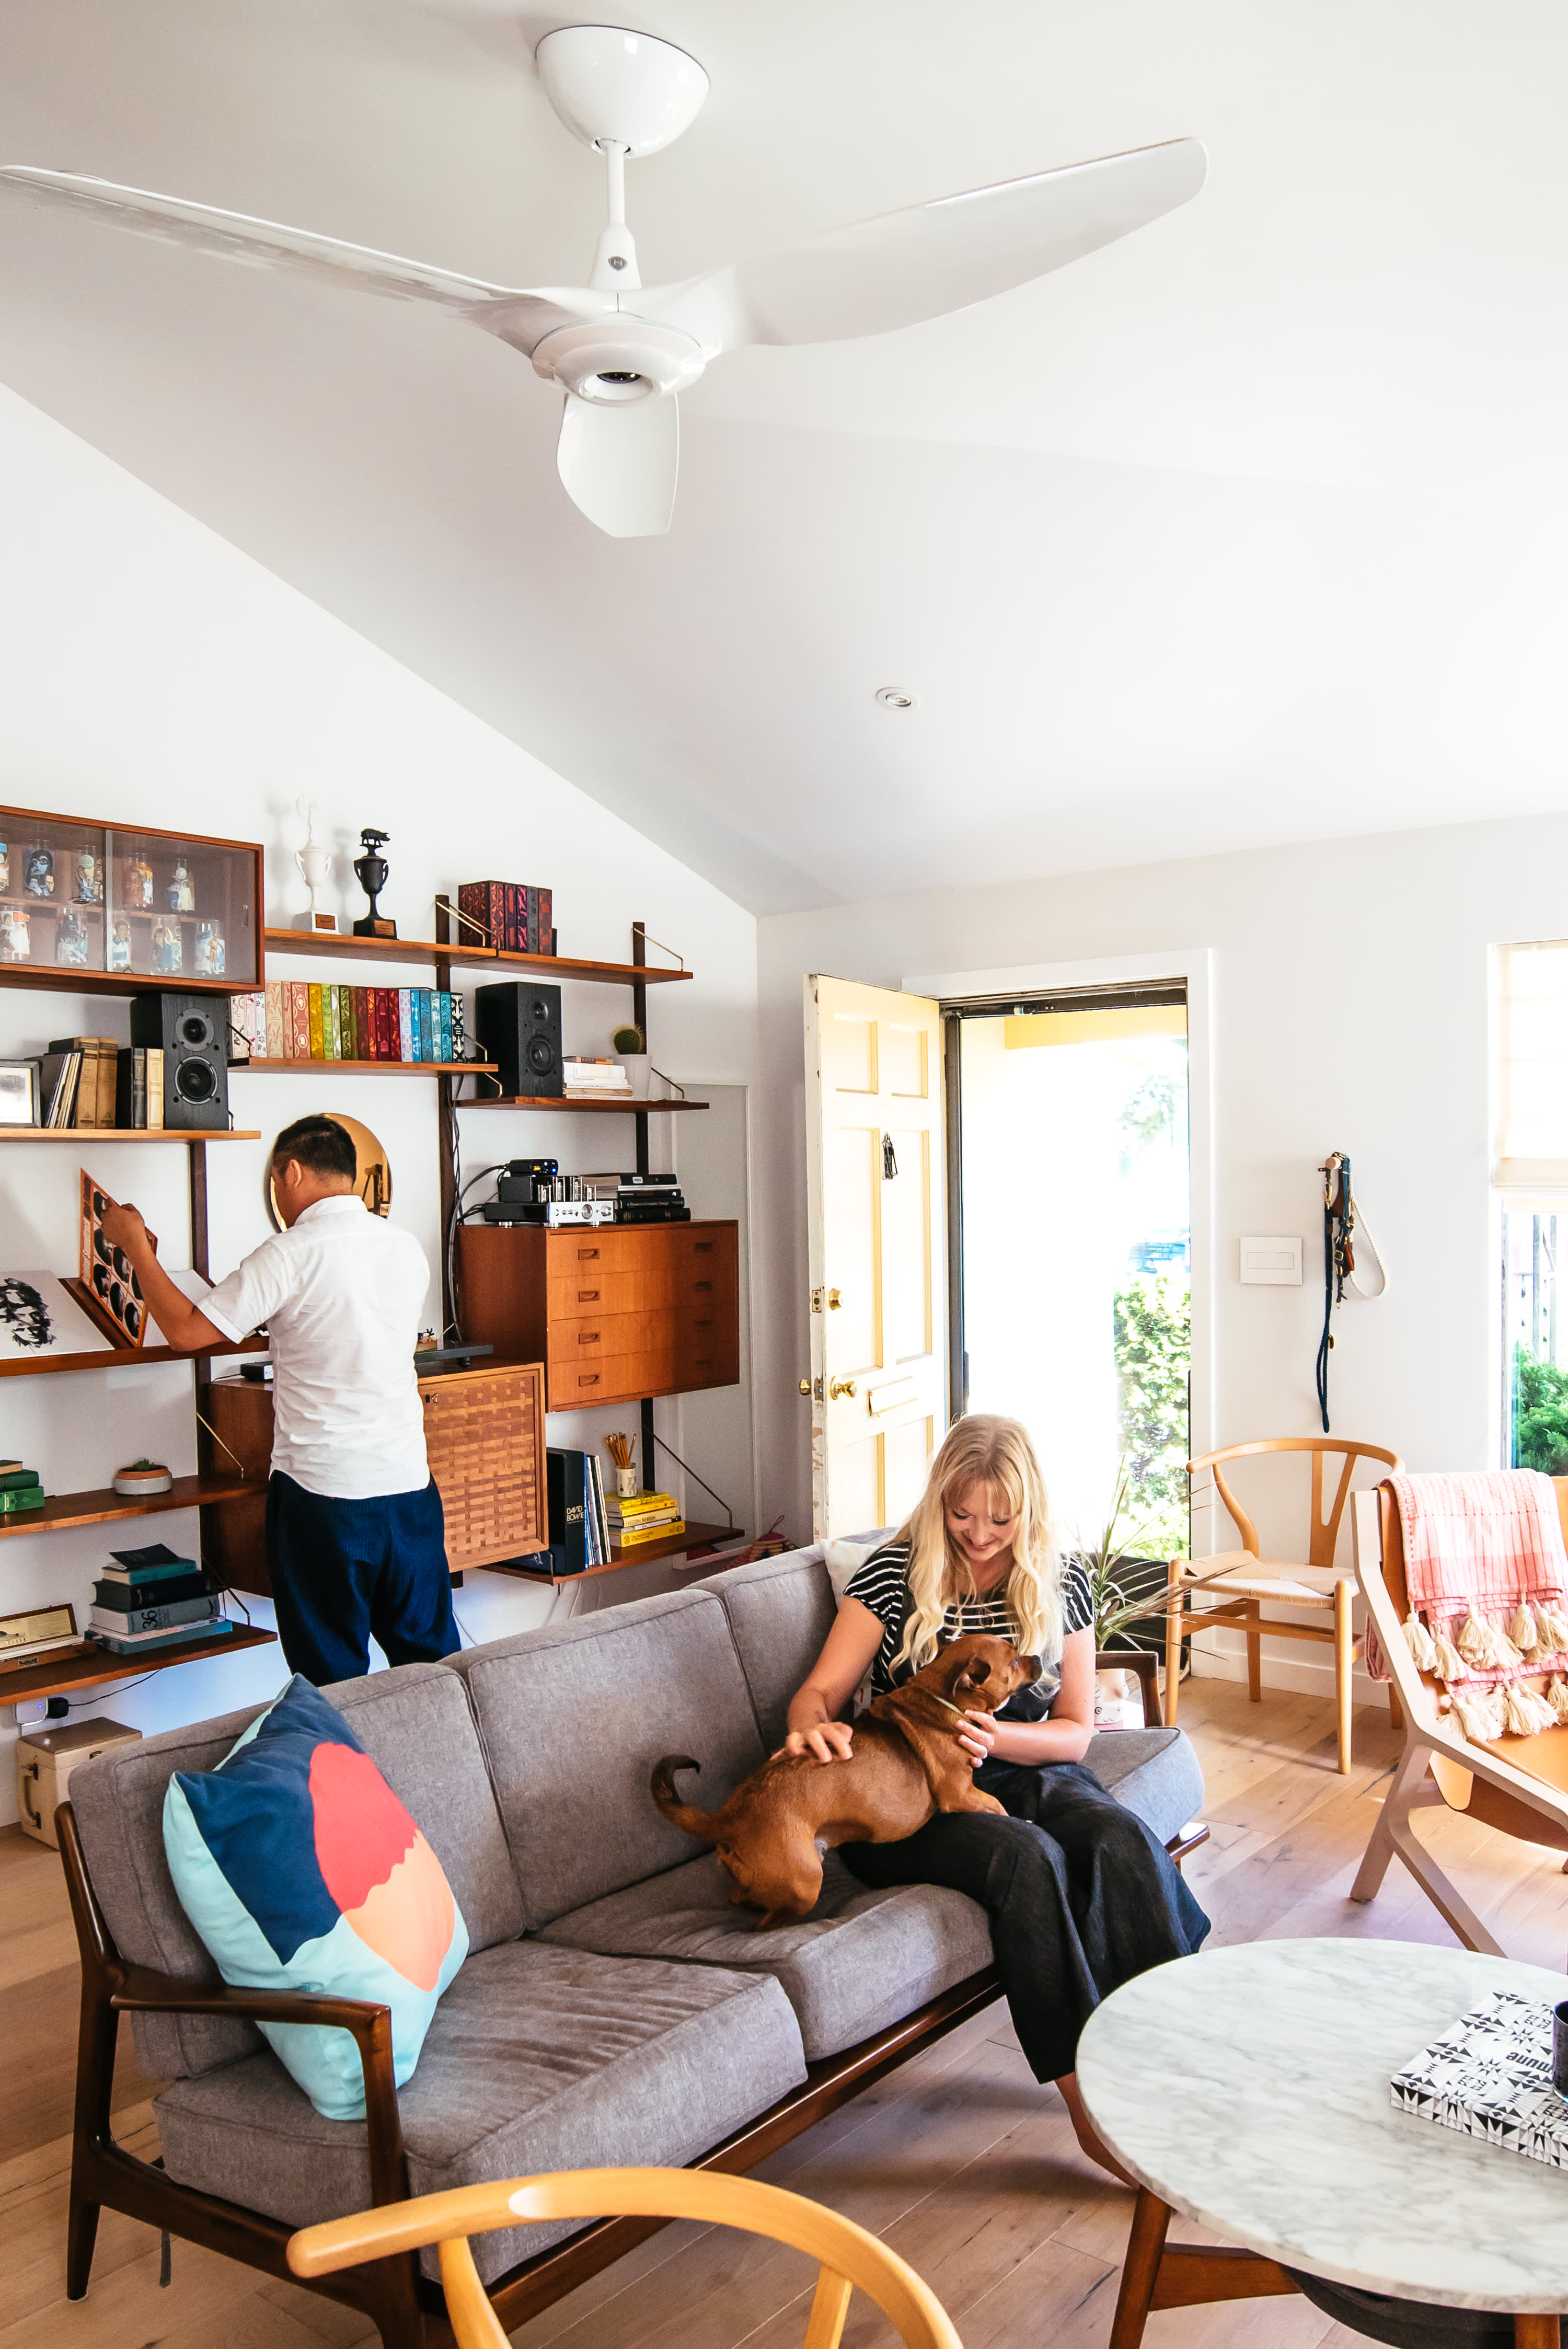 10 Simple Things To Make You Happier At Home Apartment Therapy